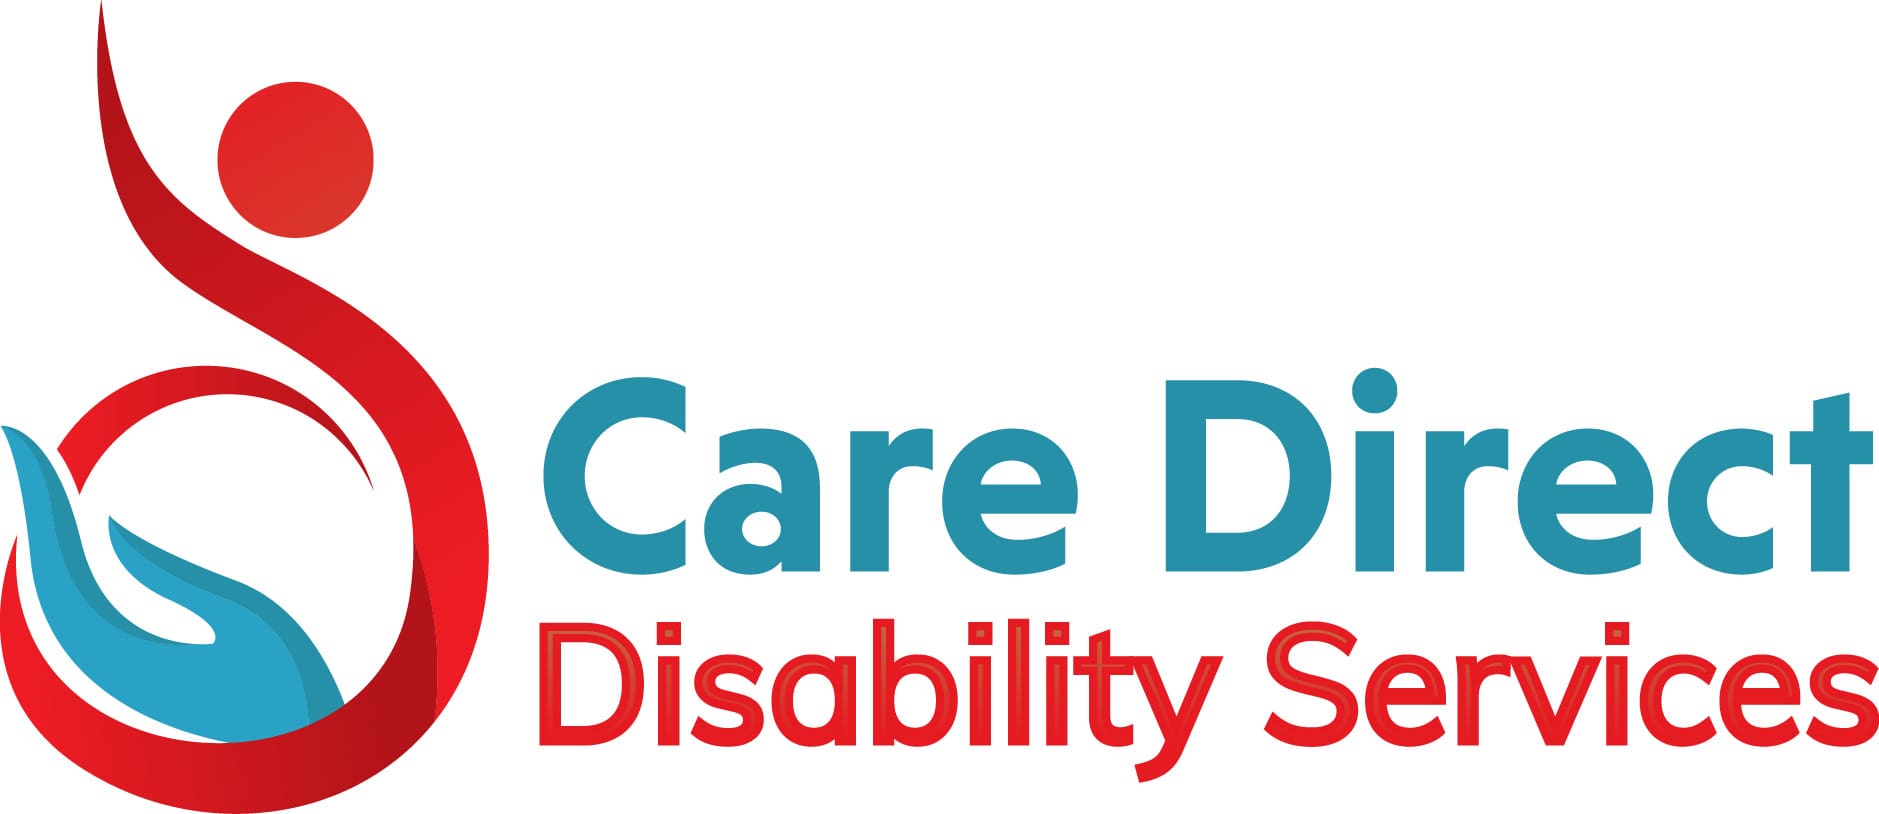 Care Direct Disability Services Logo